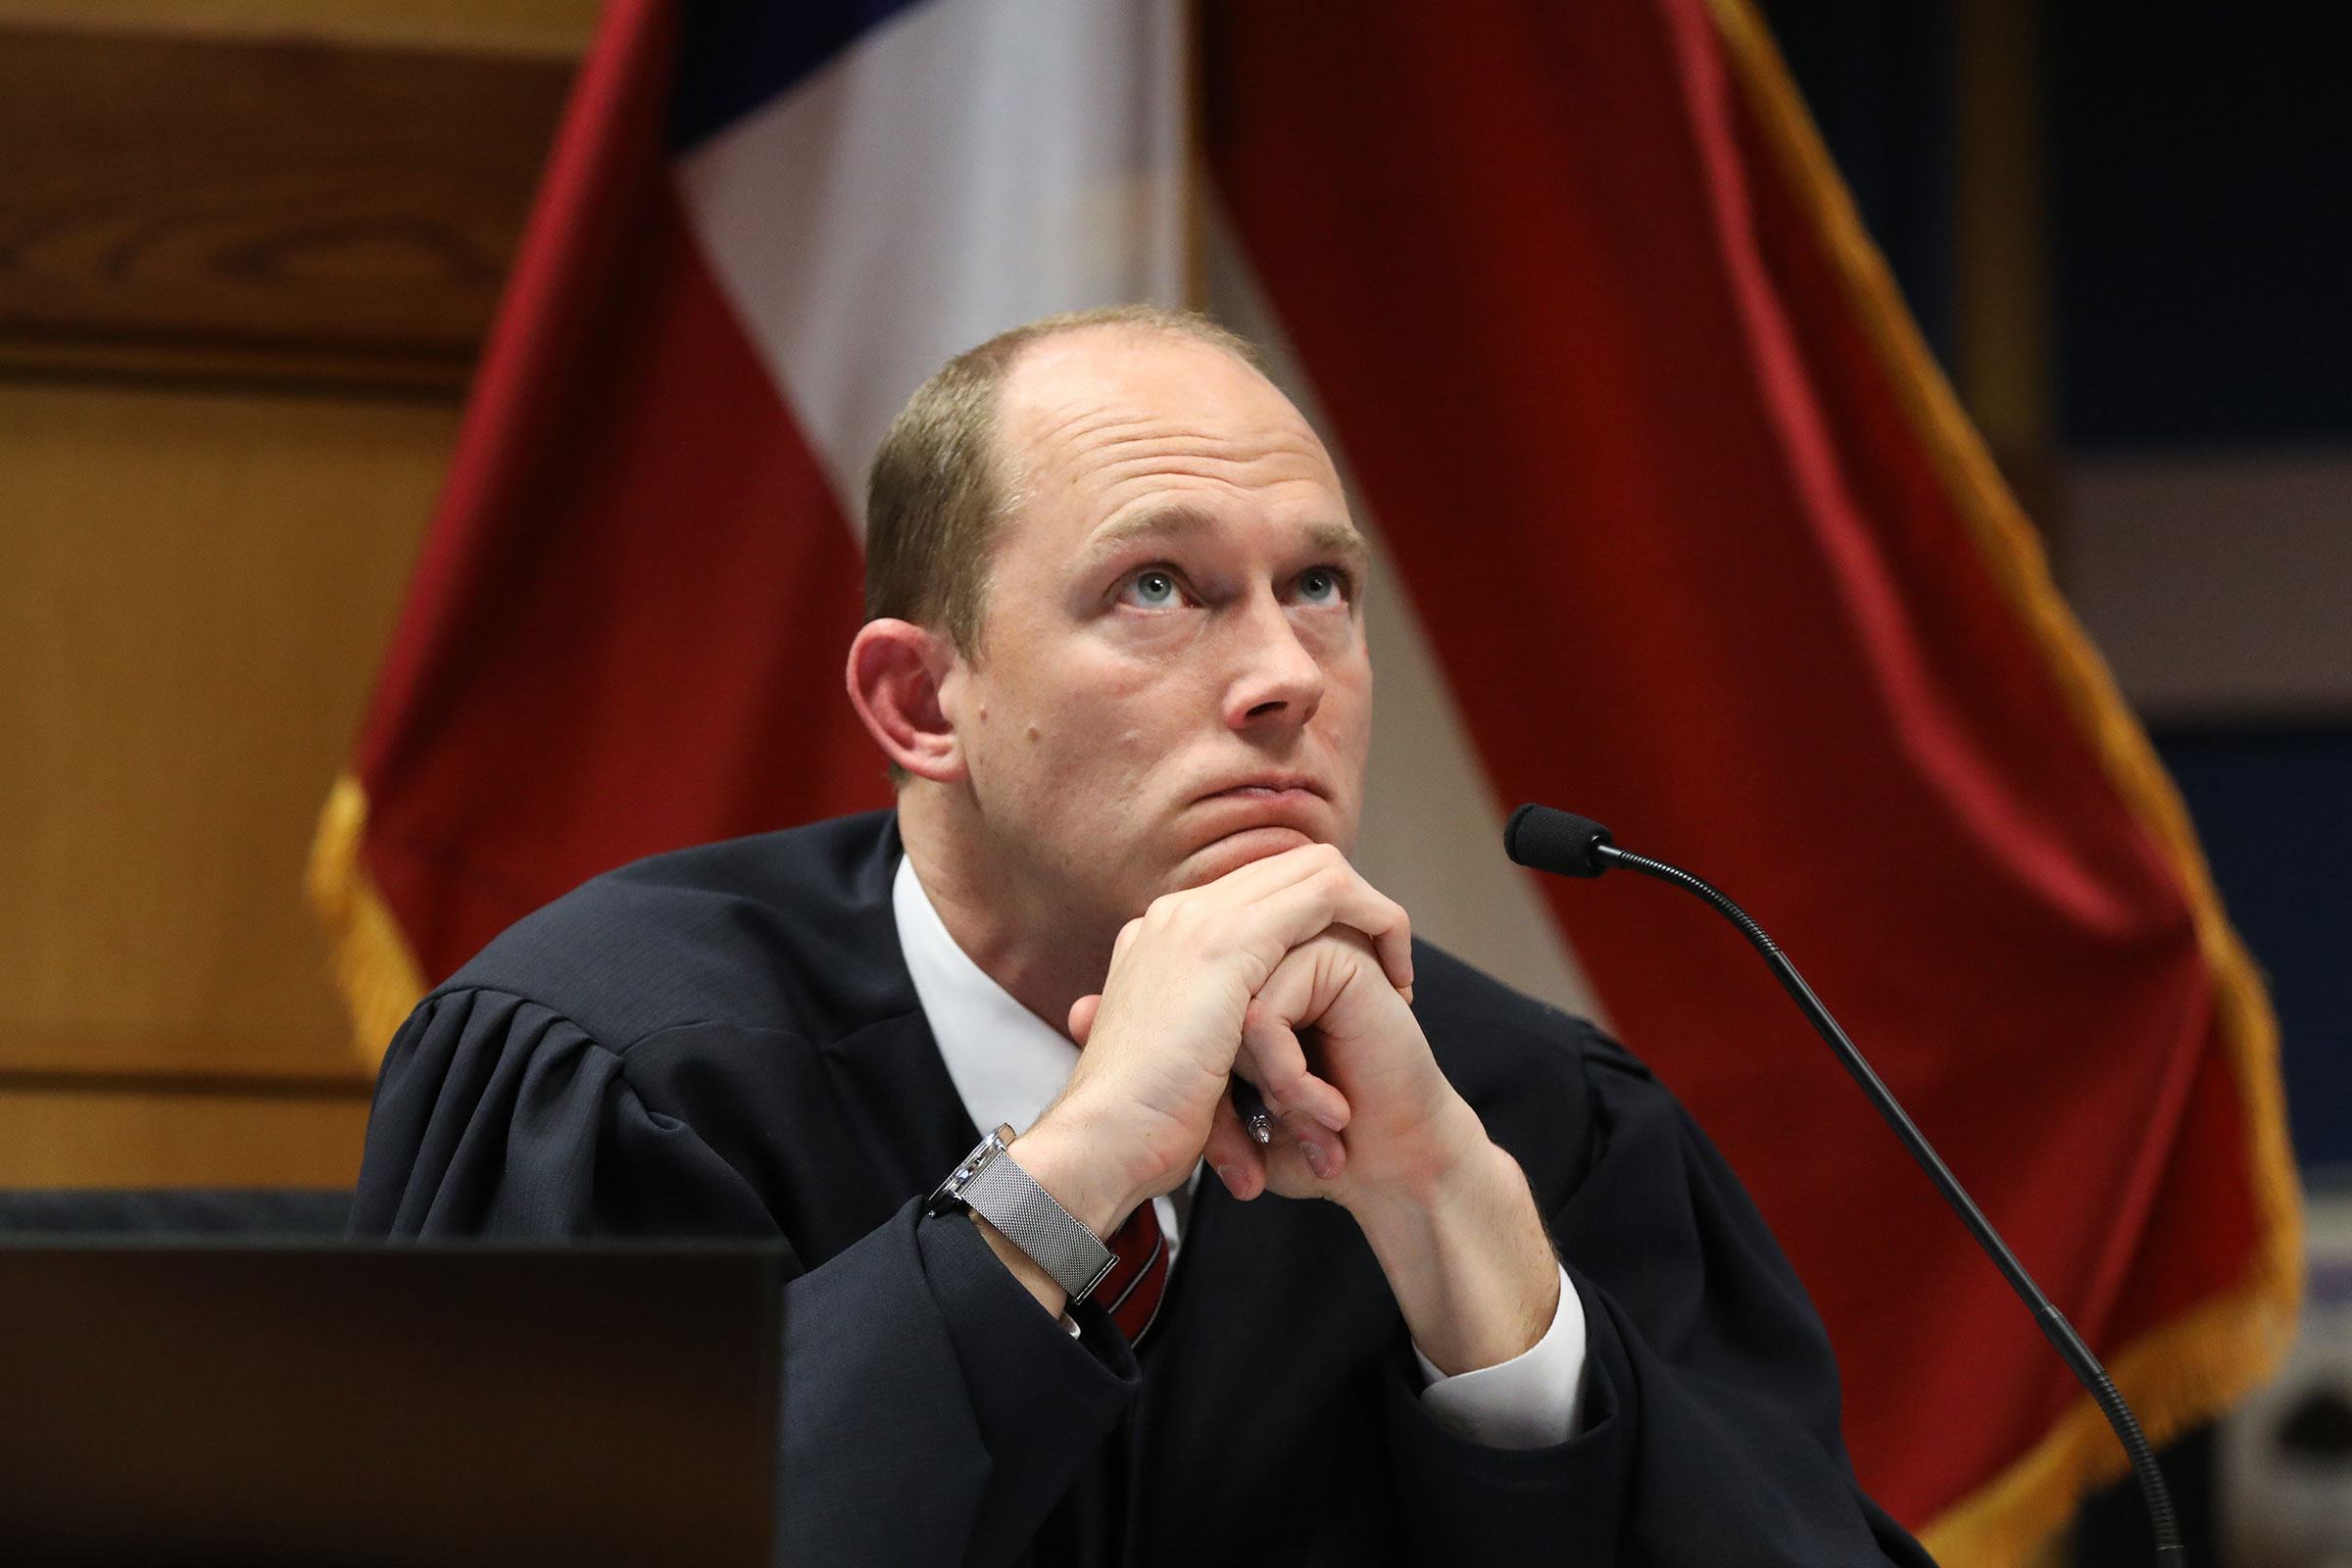 Fulton County Superior Judge Scott McAfee looks on during a hearing in the case of the State of Georgia v. Donald John Trump at the Fulton County Courthouse on February 15, in Atlanta, Georgia. 